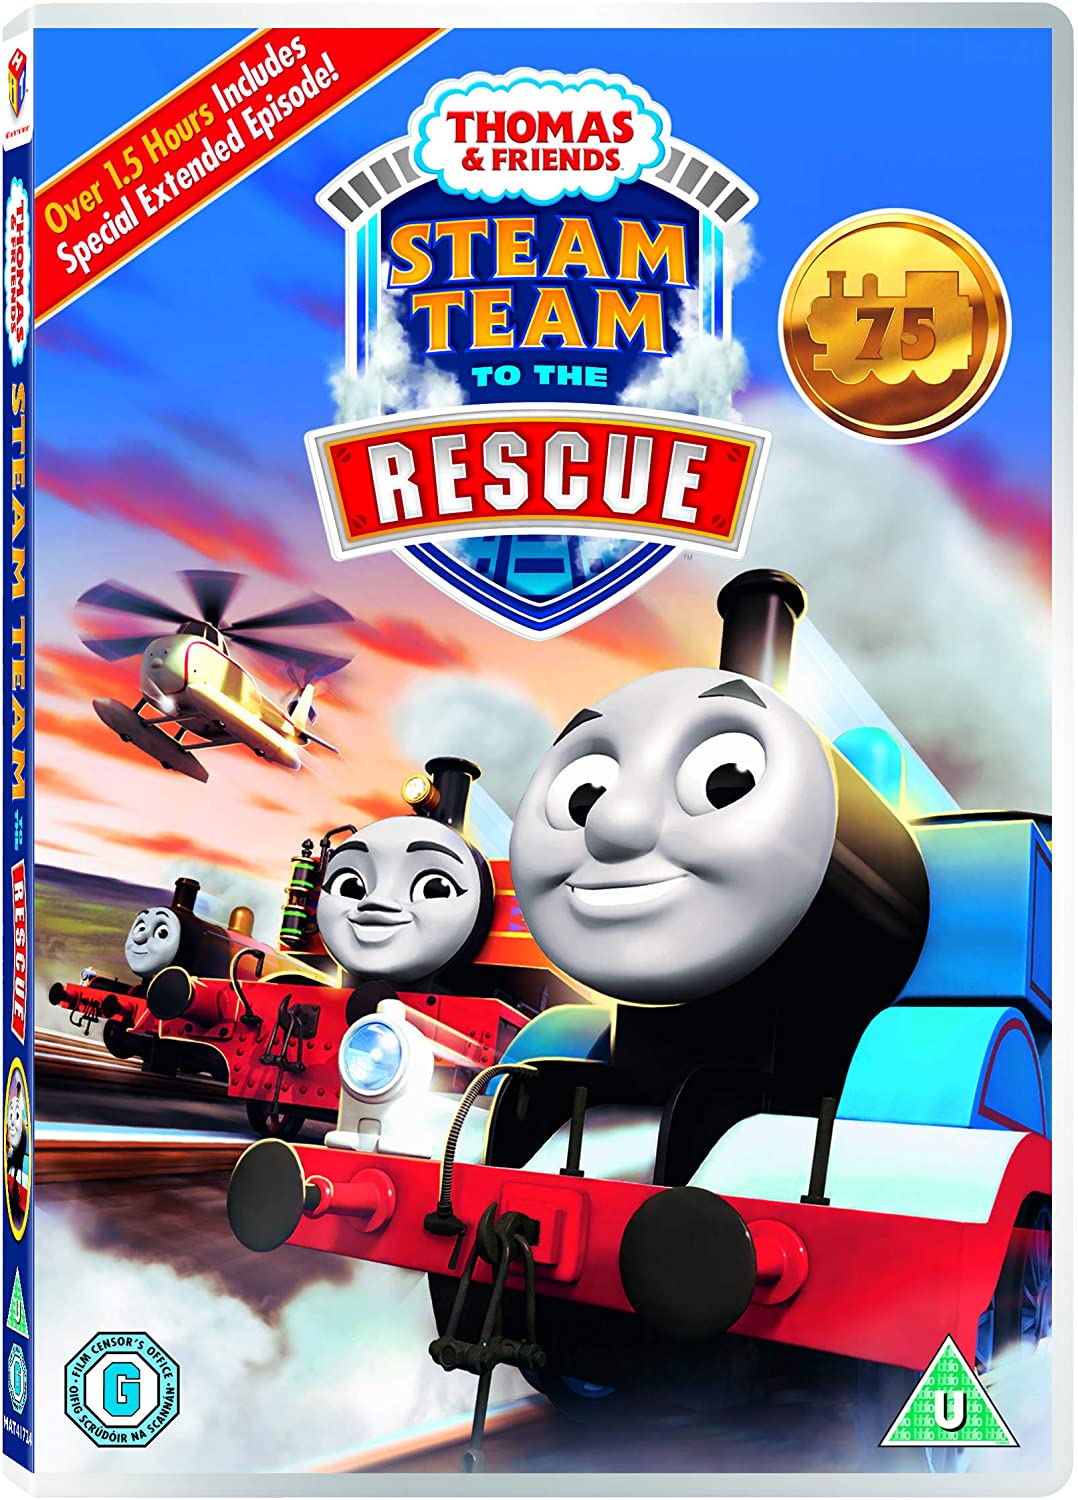 Thomas & Friends - Steam Team to the Rescue - Family [DVD]